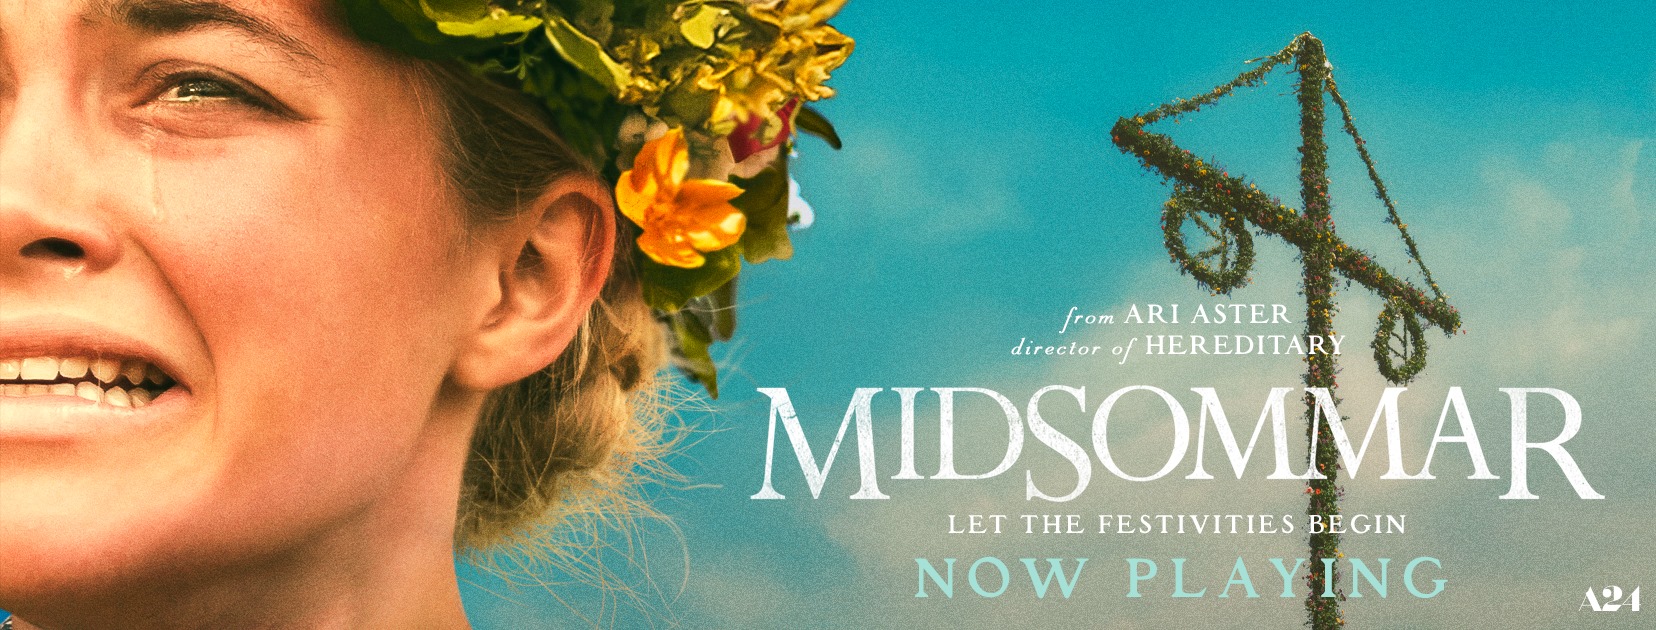 ‘Midsommar’ captures a world of nightmares coming to life in broad daylight